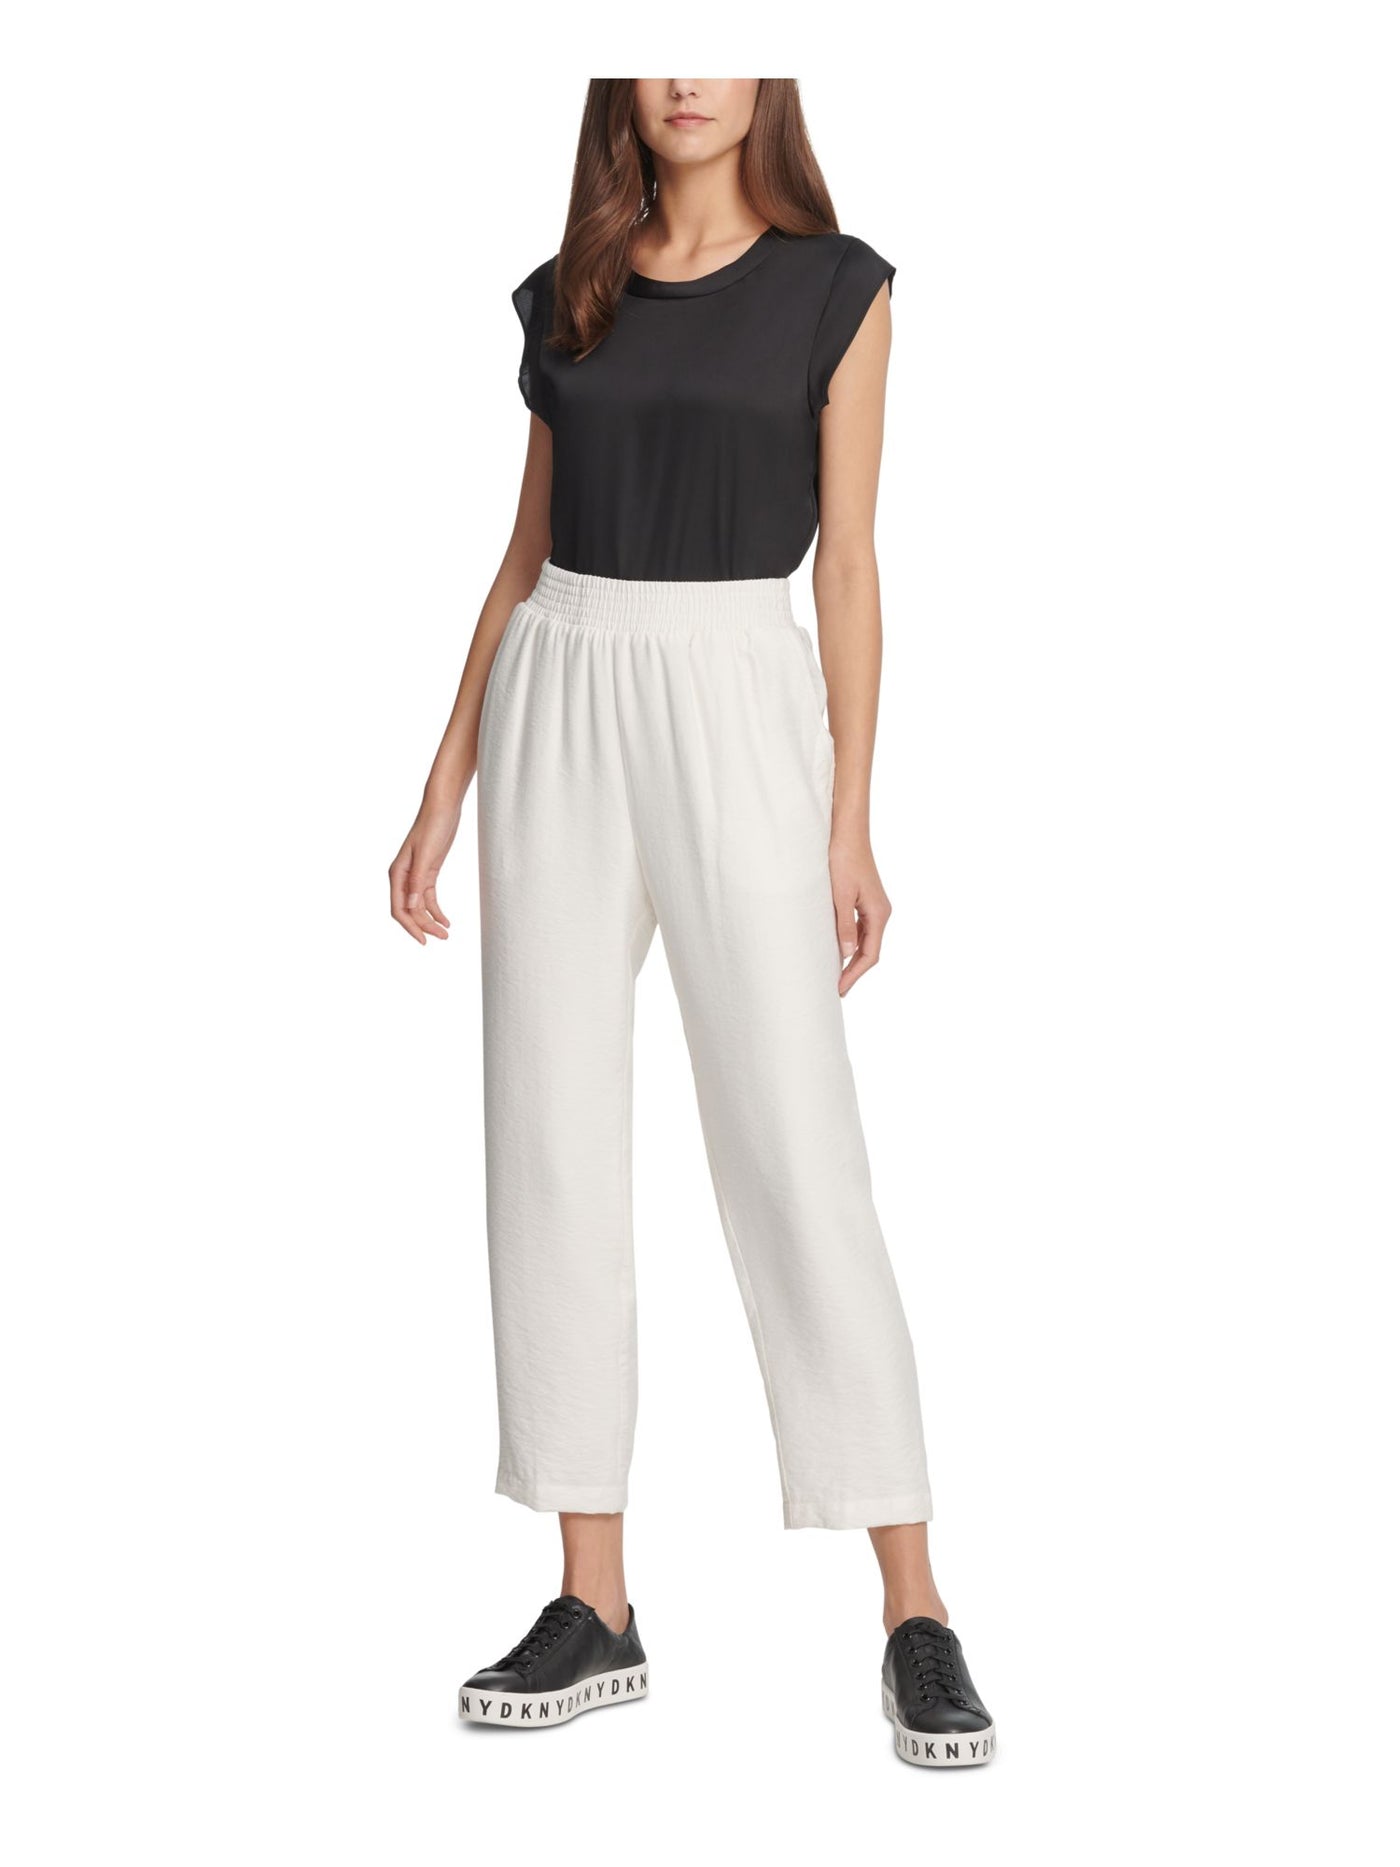 DKNY Womens Cropped Pants